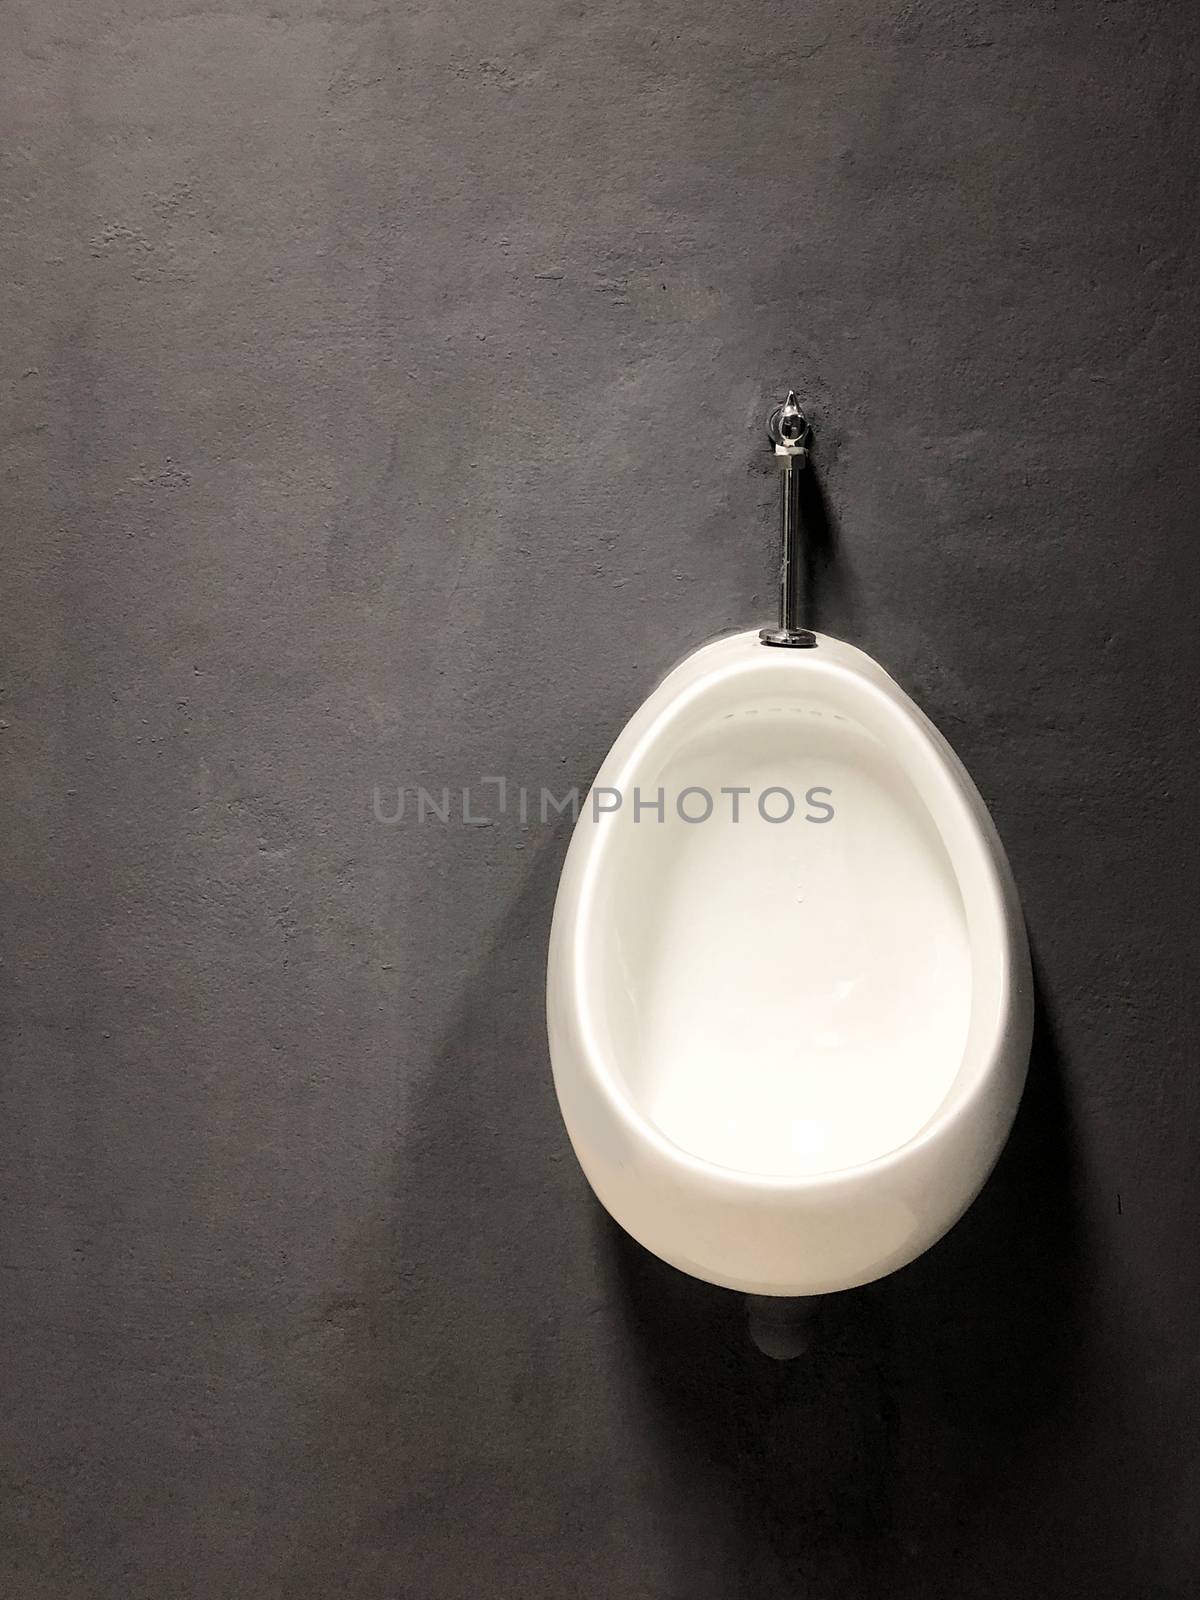 Urinal hang on loft wall style background